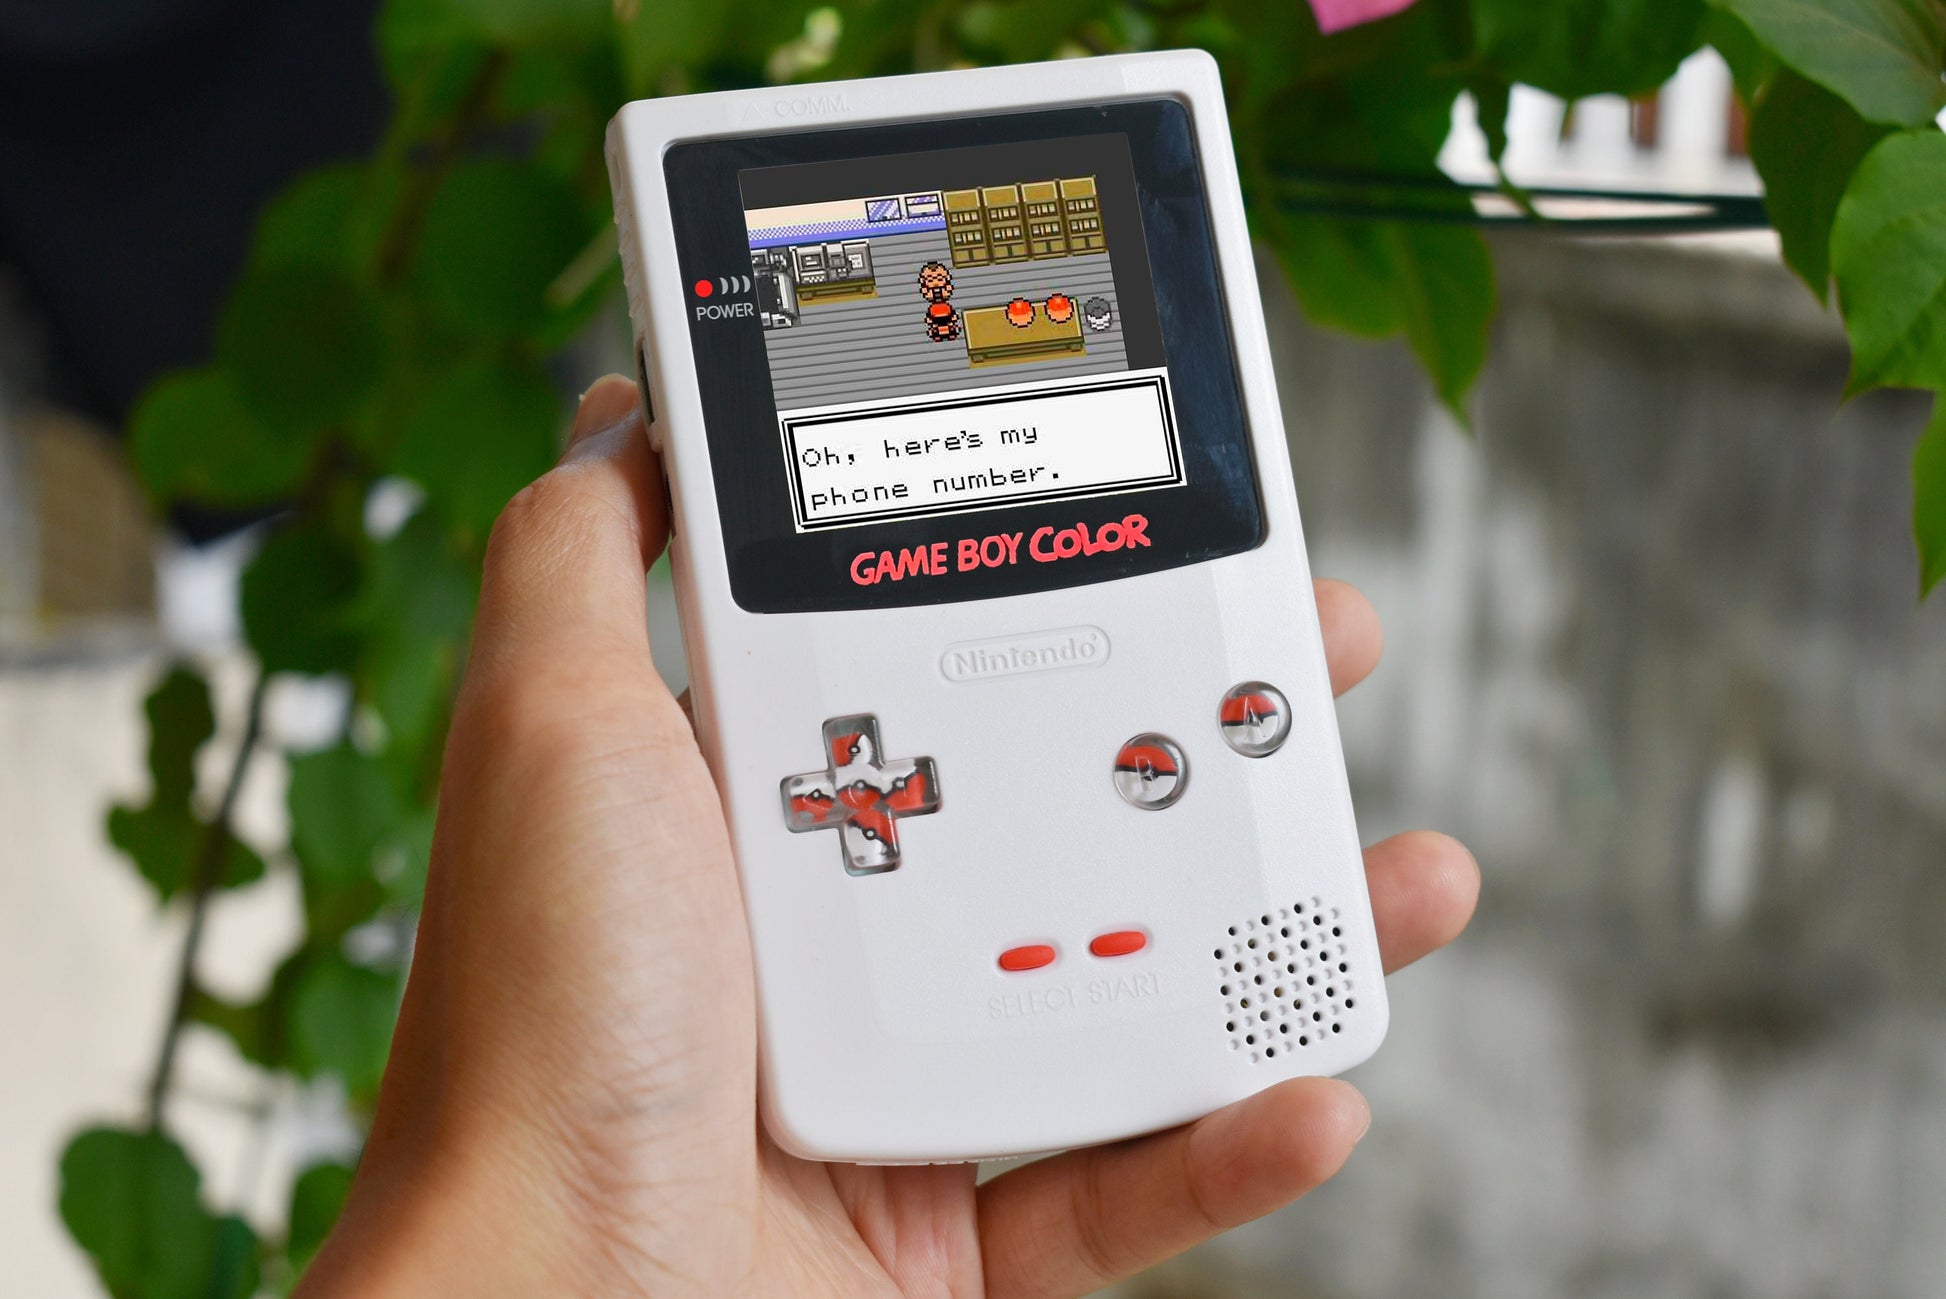 This retro handheld is the Game Boy Nintendo won't give us